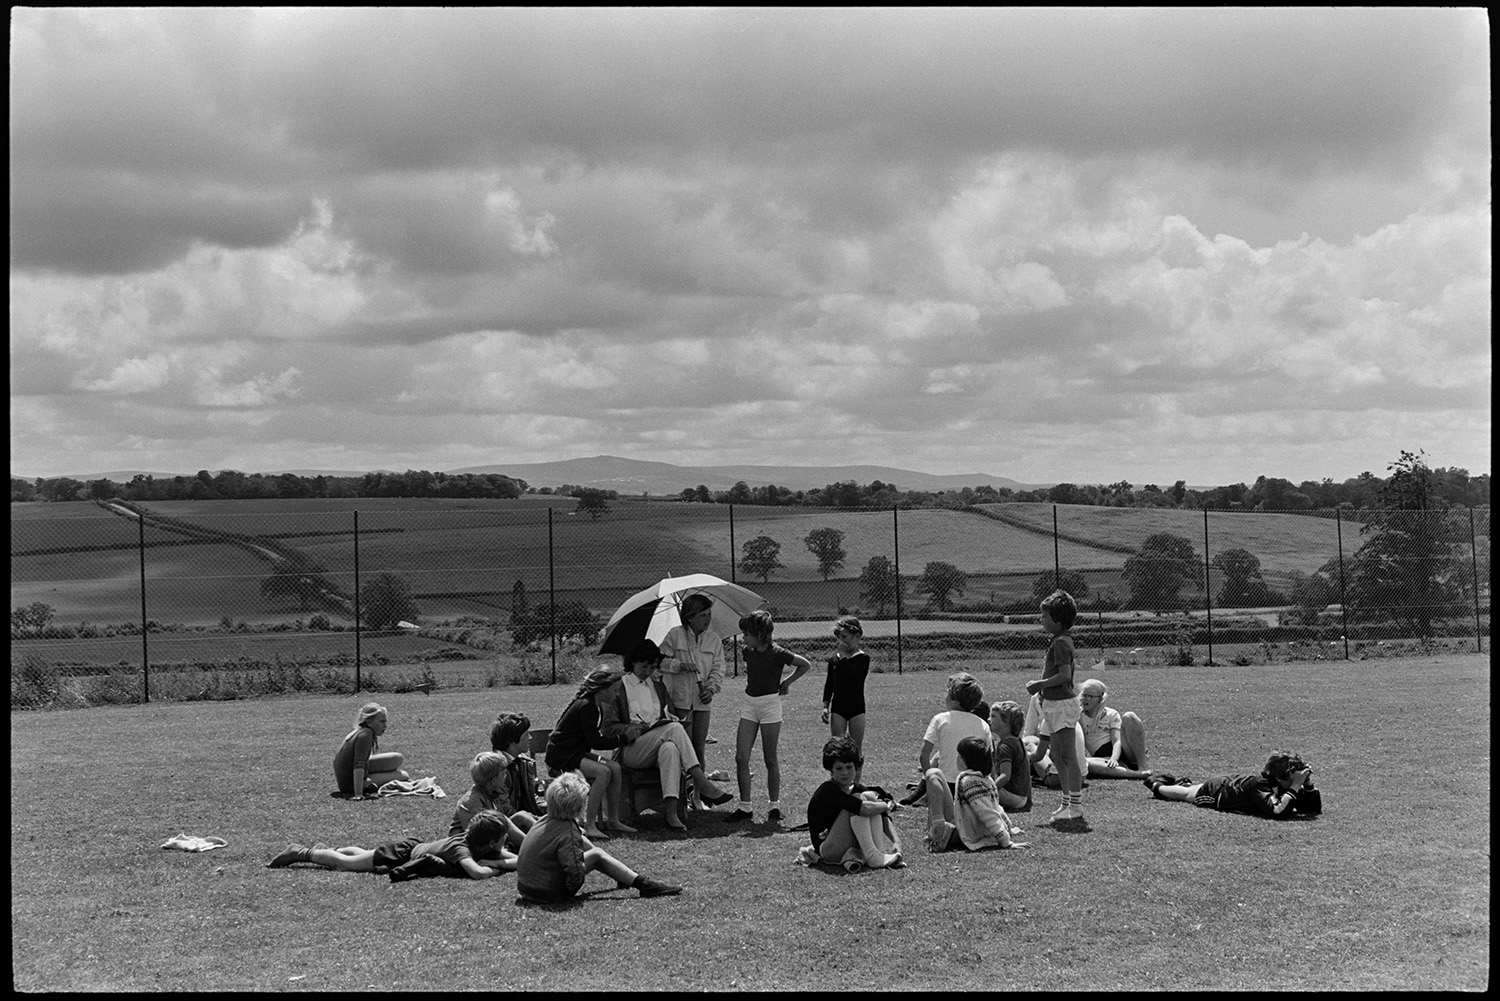 School sports day, children, races and spectators. 
[Children sat on the school field at Winkleigh School resting at a sports day where children from Black Torrington School, Northlew School, Dolton School and Highampton School were competing. A teacher is making notes and a child is holding an umbrella to shield her from the sun. A landscape of fields and trees can be seen in the background.]